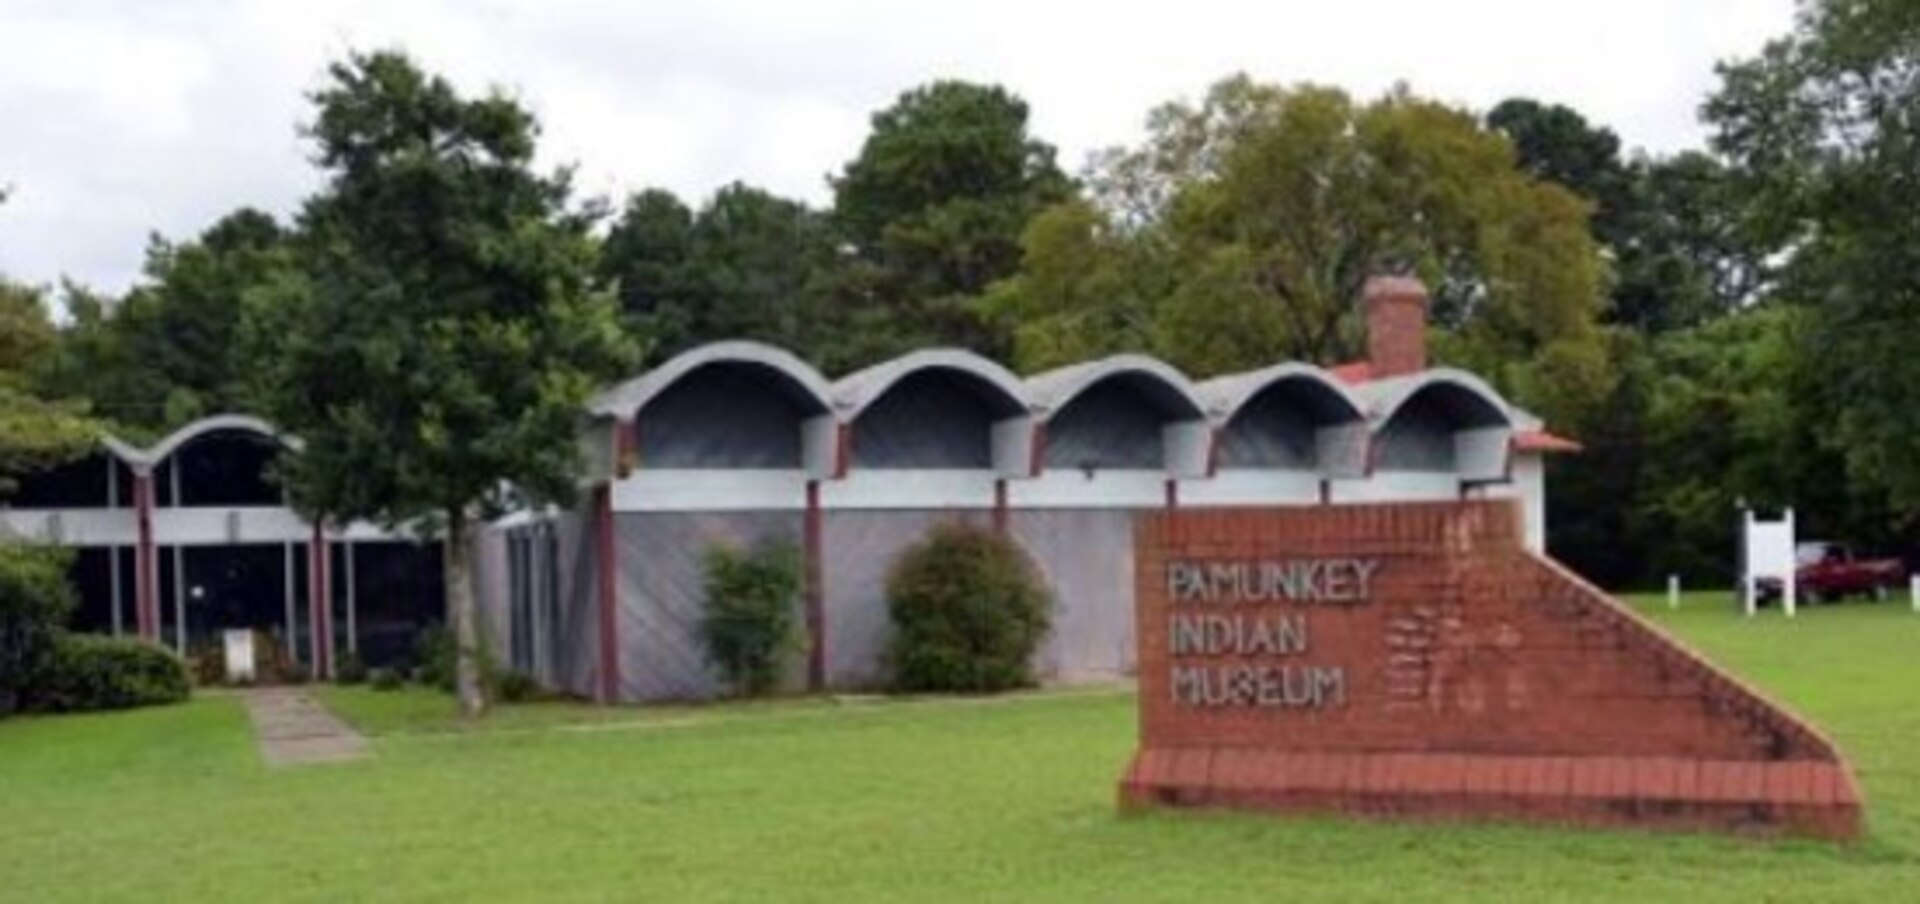 IMAGE: 201214-N-DE005-003 - DAHLGREN, Va. (Nov. 30, 2020) – The Pamunkey Indian Museum provides an opportunity to learn more about the Pamunkey Indian Tribe. Located on the Pamunkey Indian Reservation in Virginia, the museum displays various historical artifacts such as tools, pottery, clothing, and significant documents representing the vast history of the tribe. (U.S. Navy/Released)